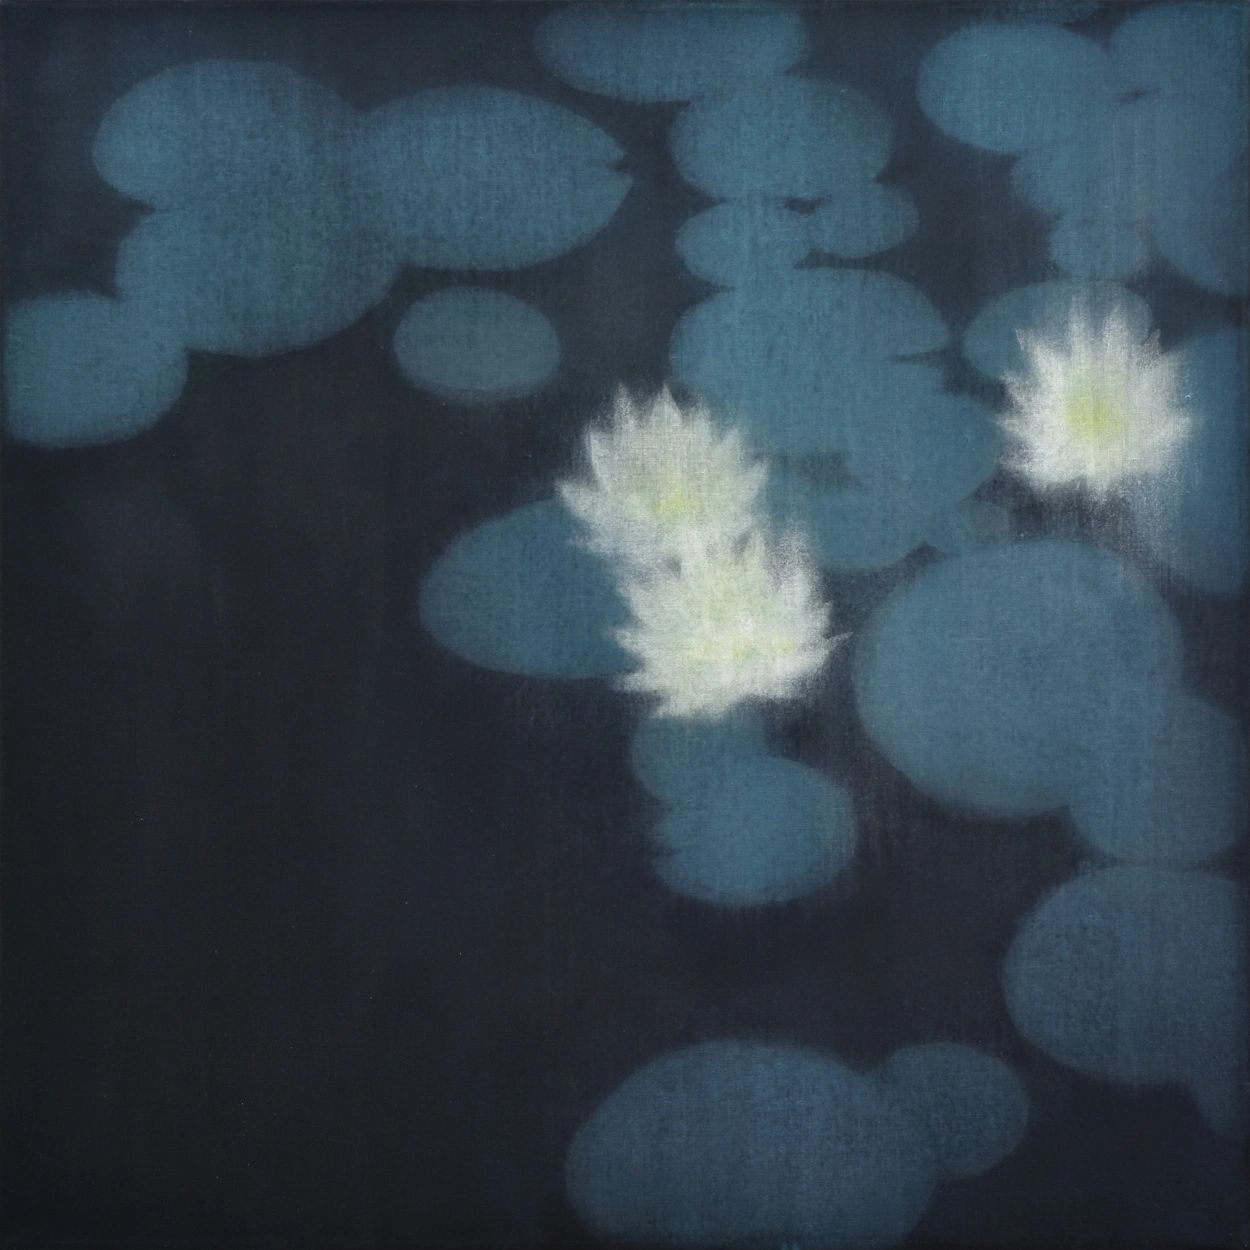 Square contemporary art Nihonga serene night scene water lily pond glowing flowers round leaves    